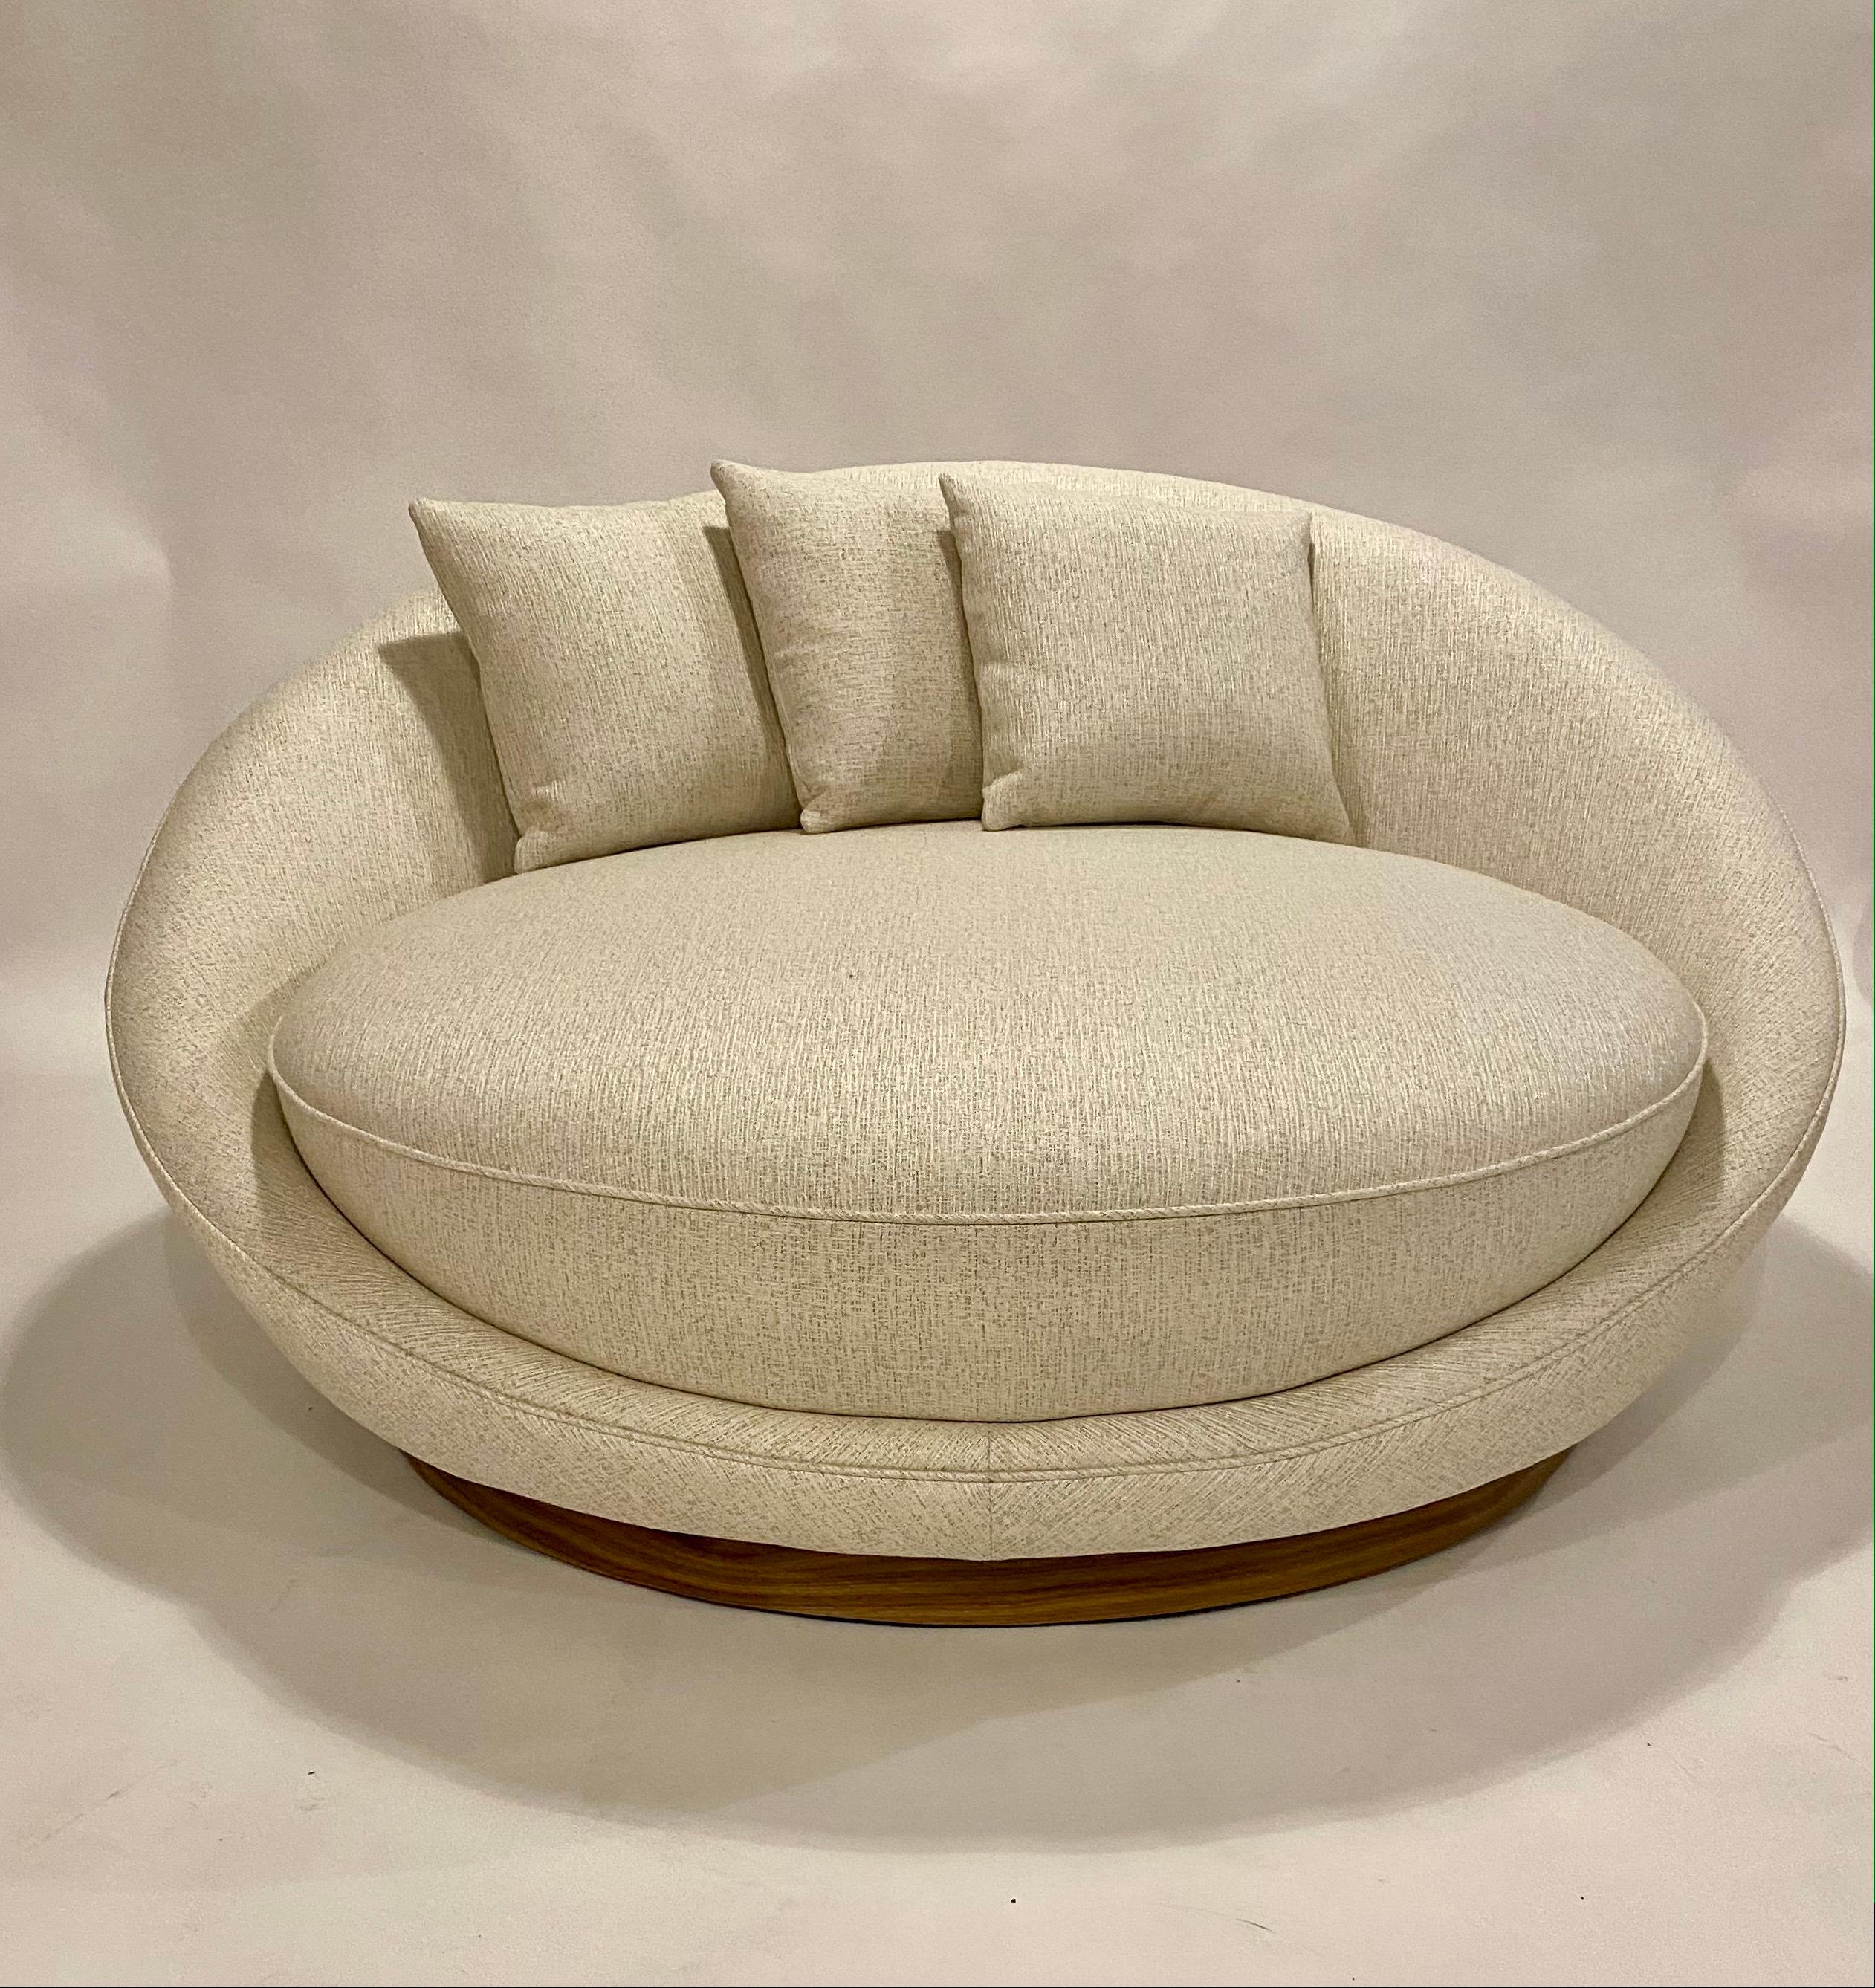 Midcentury satellite chaise by Milo Baughman newly restored on a walnut plinth and upholstered in an ivory and ecru textured linen fabric. Comes complete with three matching feather pillows.